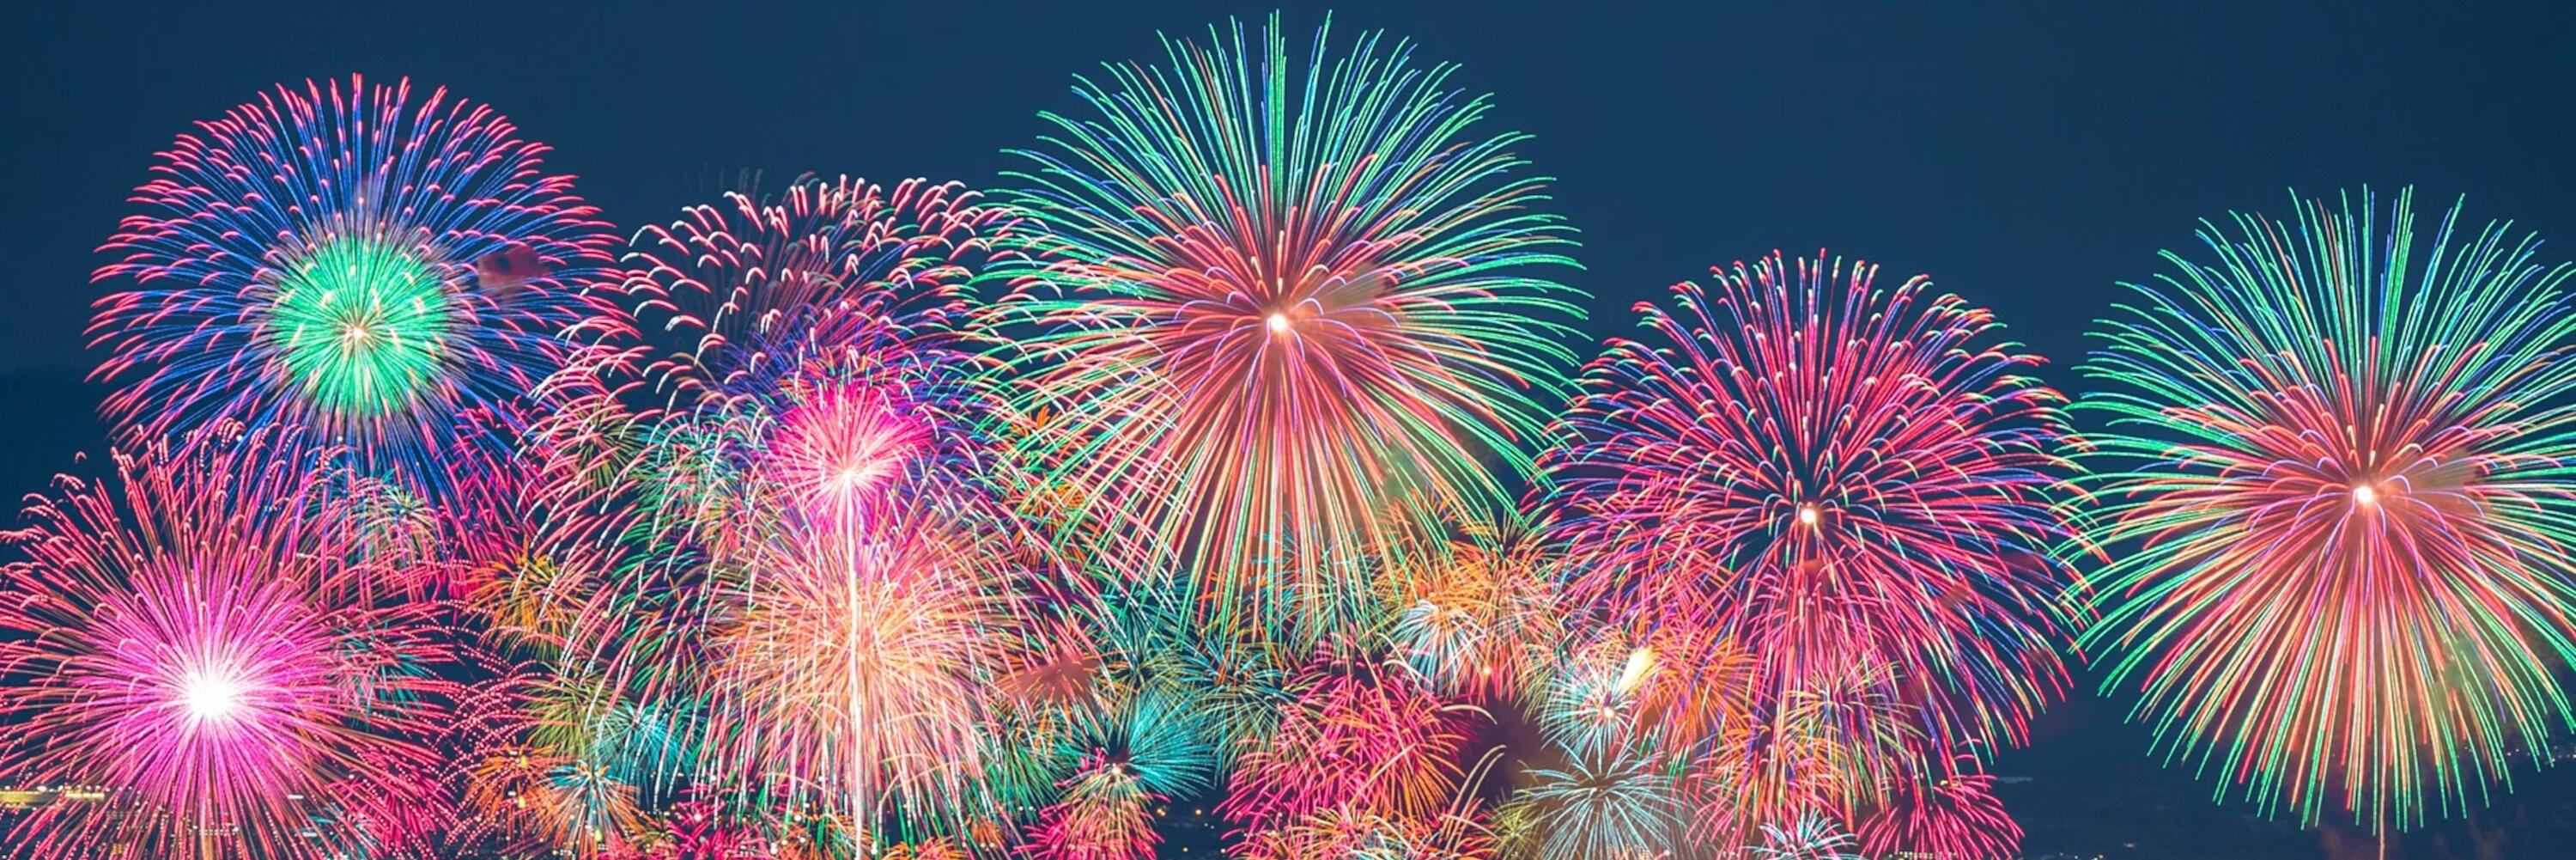 Photo of fireworks.